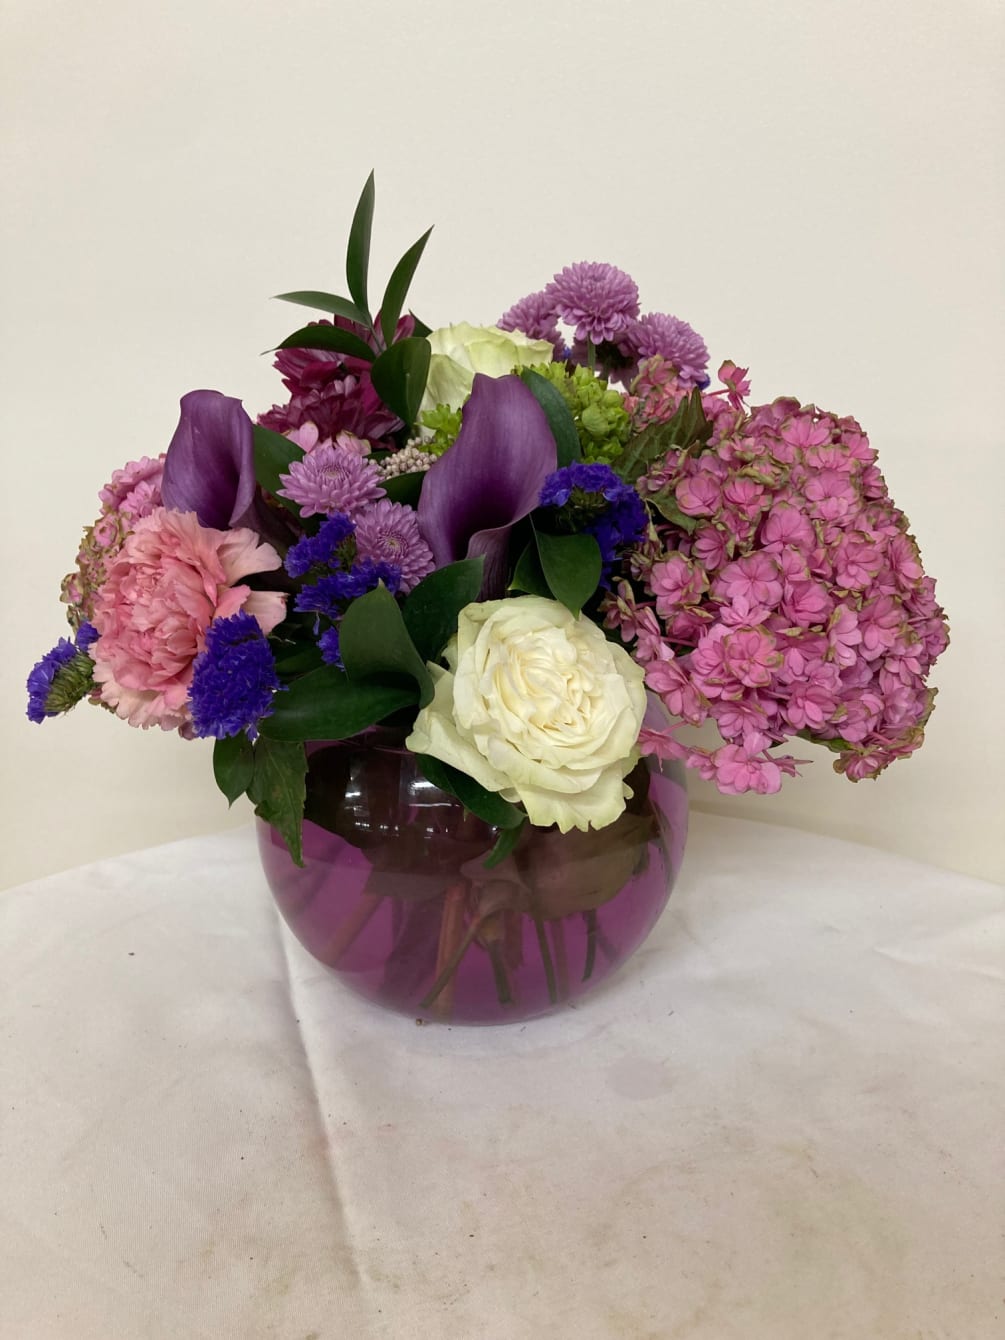 Purple calla lilies, pink hydrangea, white rose, pink carnation, lavender cushions, with